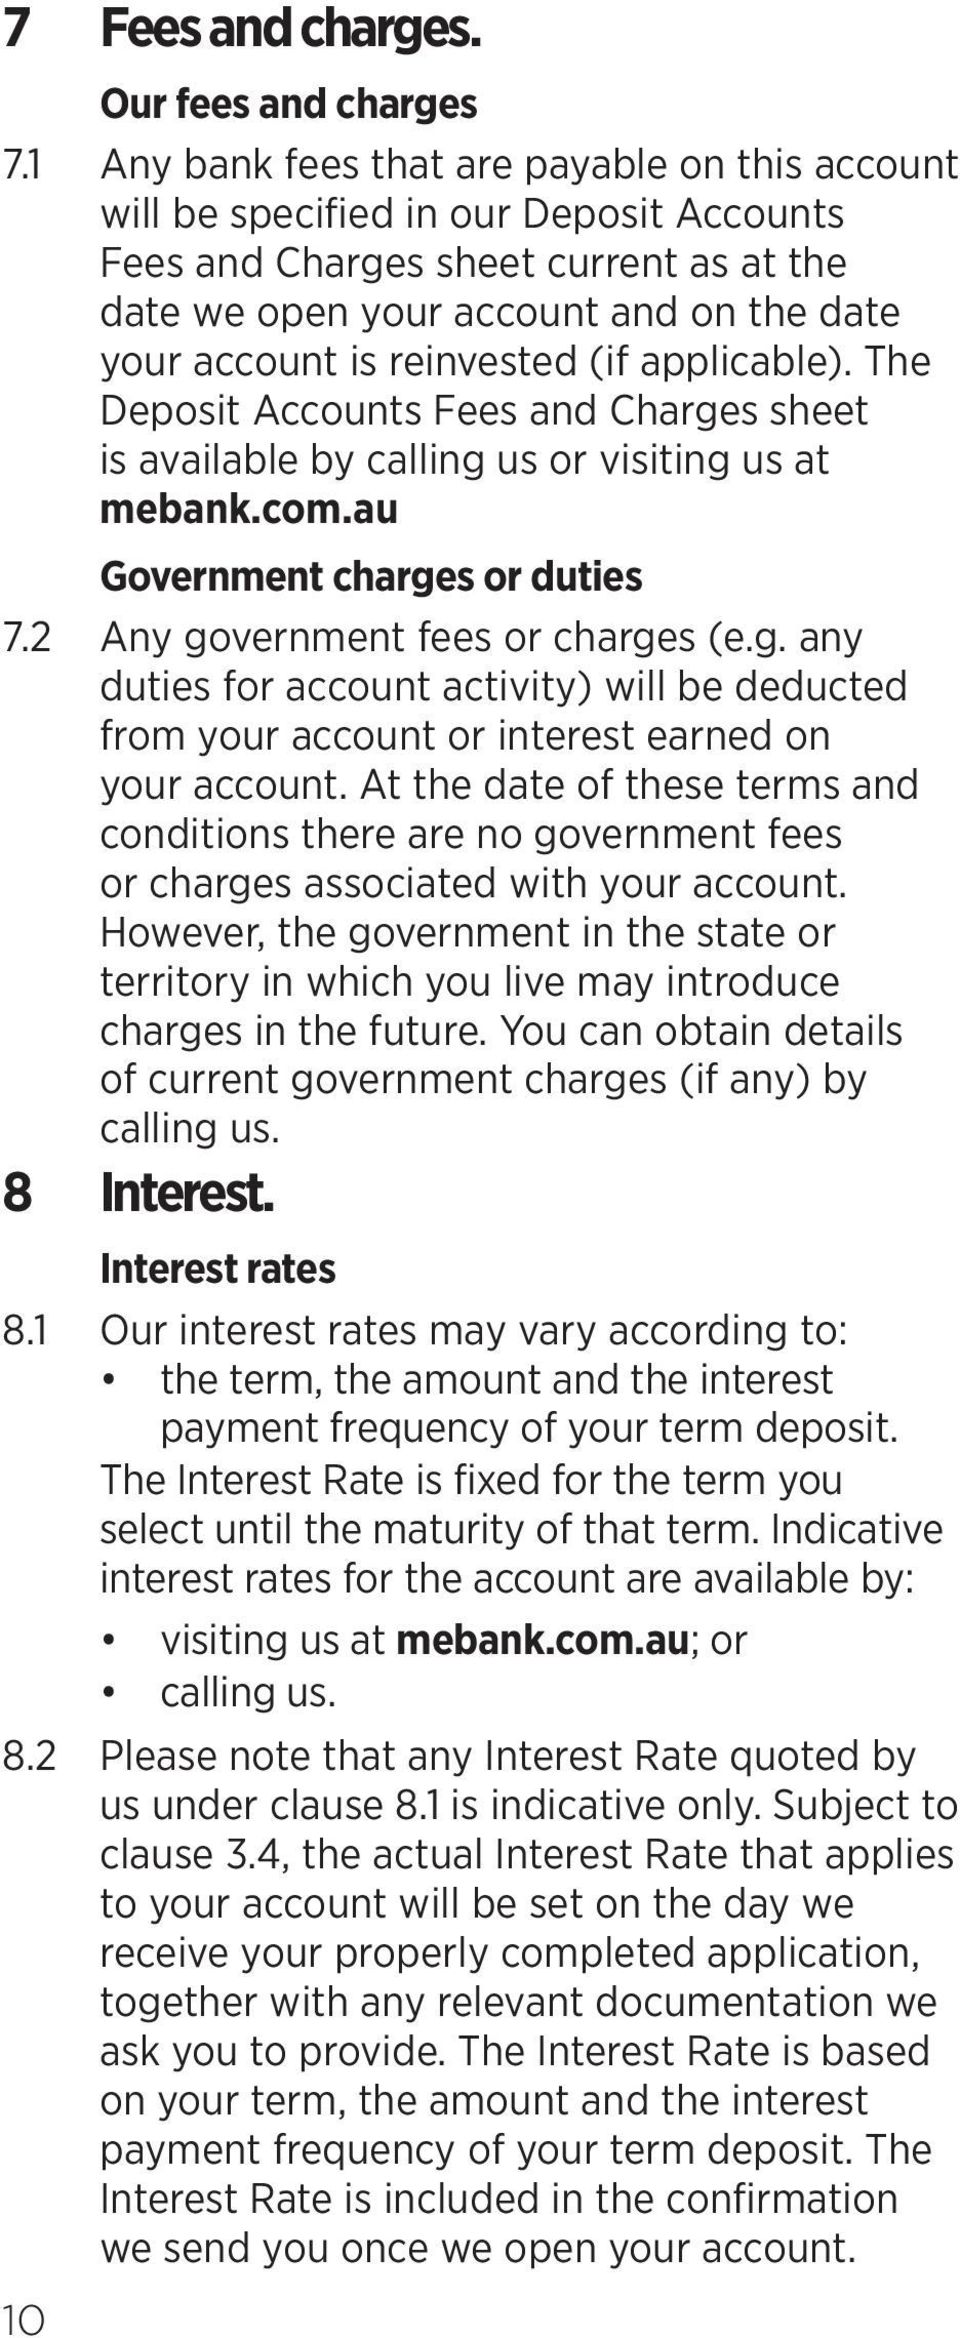 reinvested (if applicable). The Deposit Accounts Fees and Charges sheet is available by calling us or visiting us at mebank.com.au Government charges or duties 7.2 Any government fees or charges (e.g. any duties for account activity) will be deducted from your account or interest earned on your account.